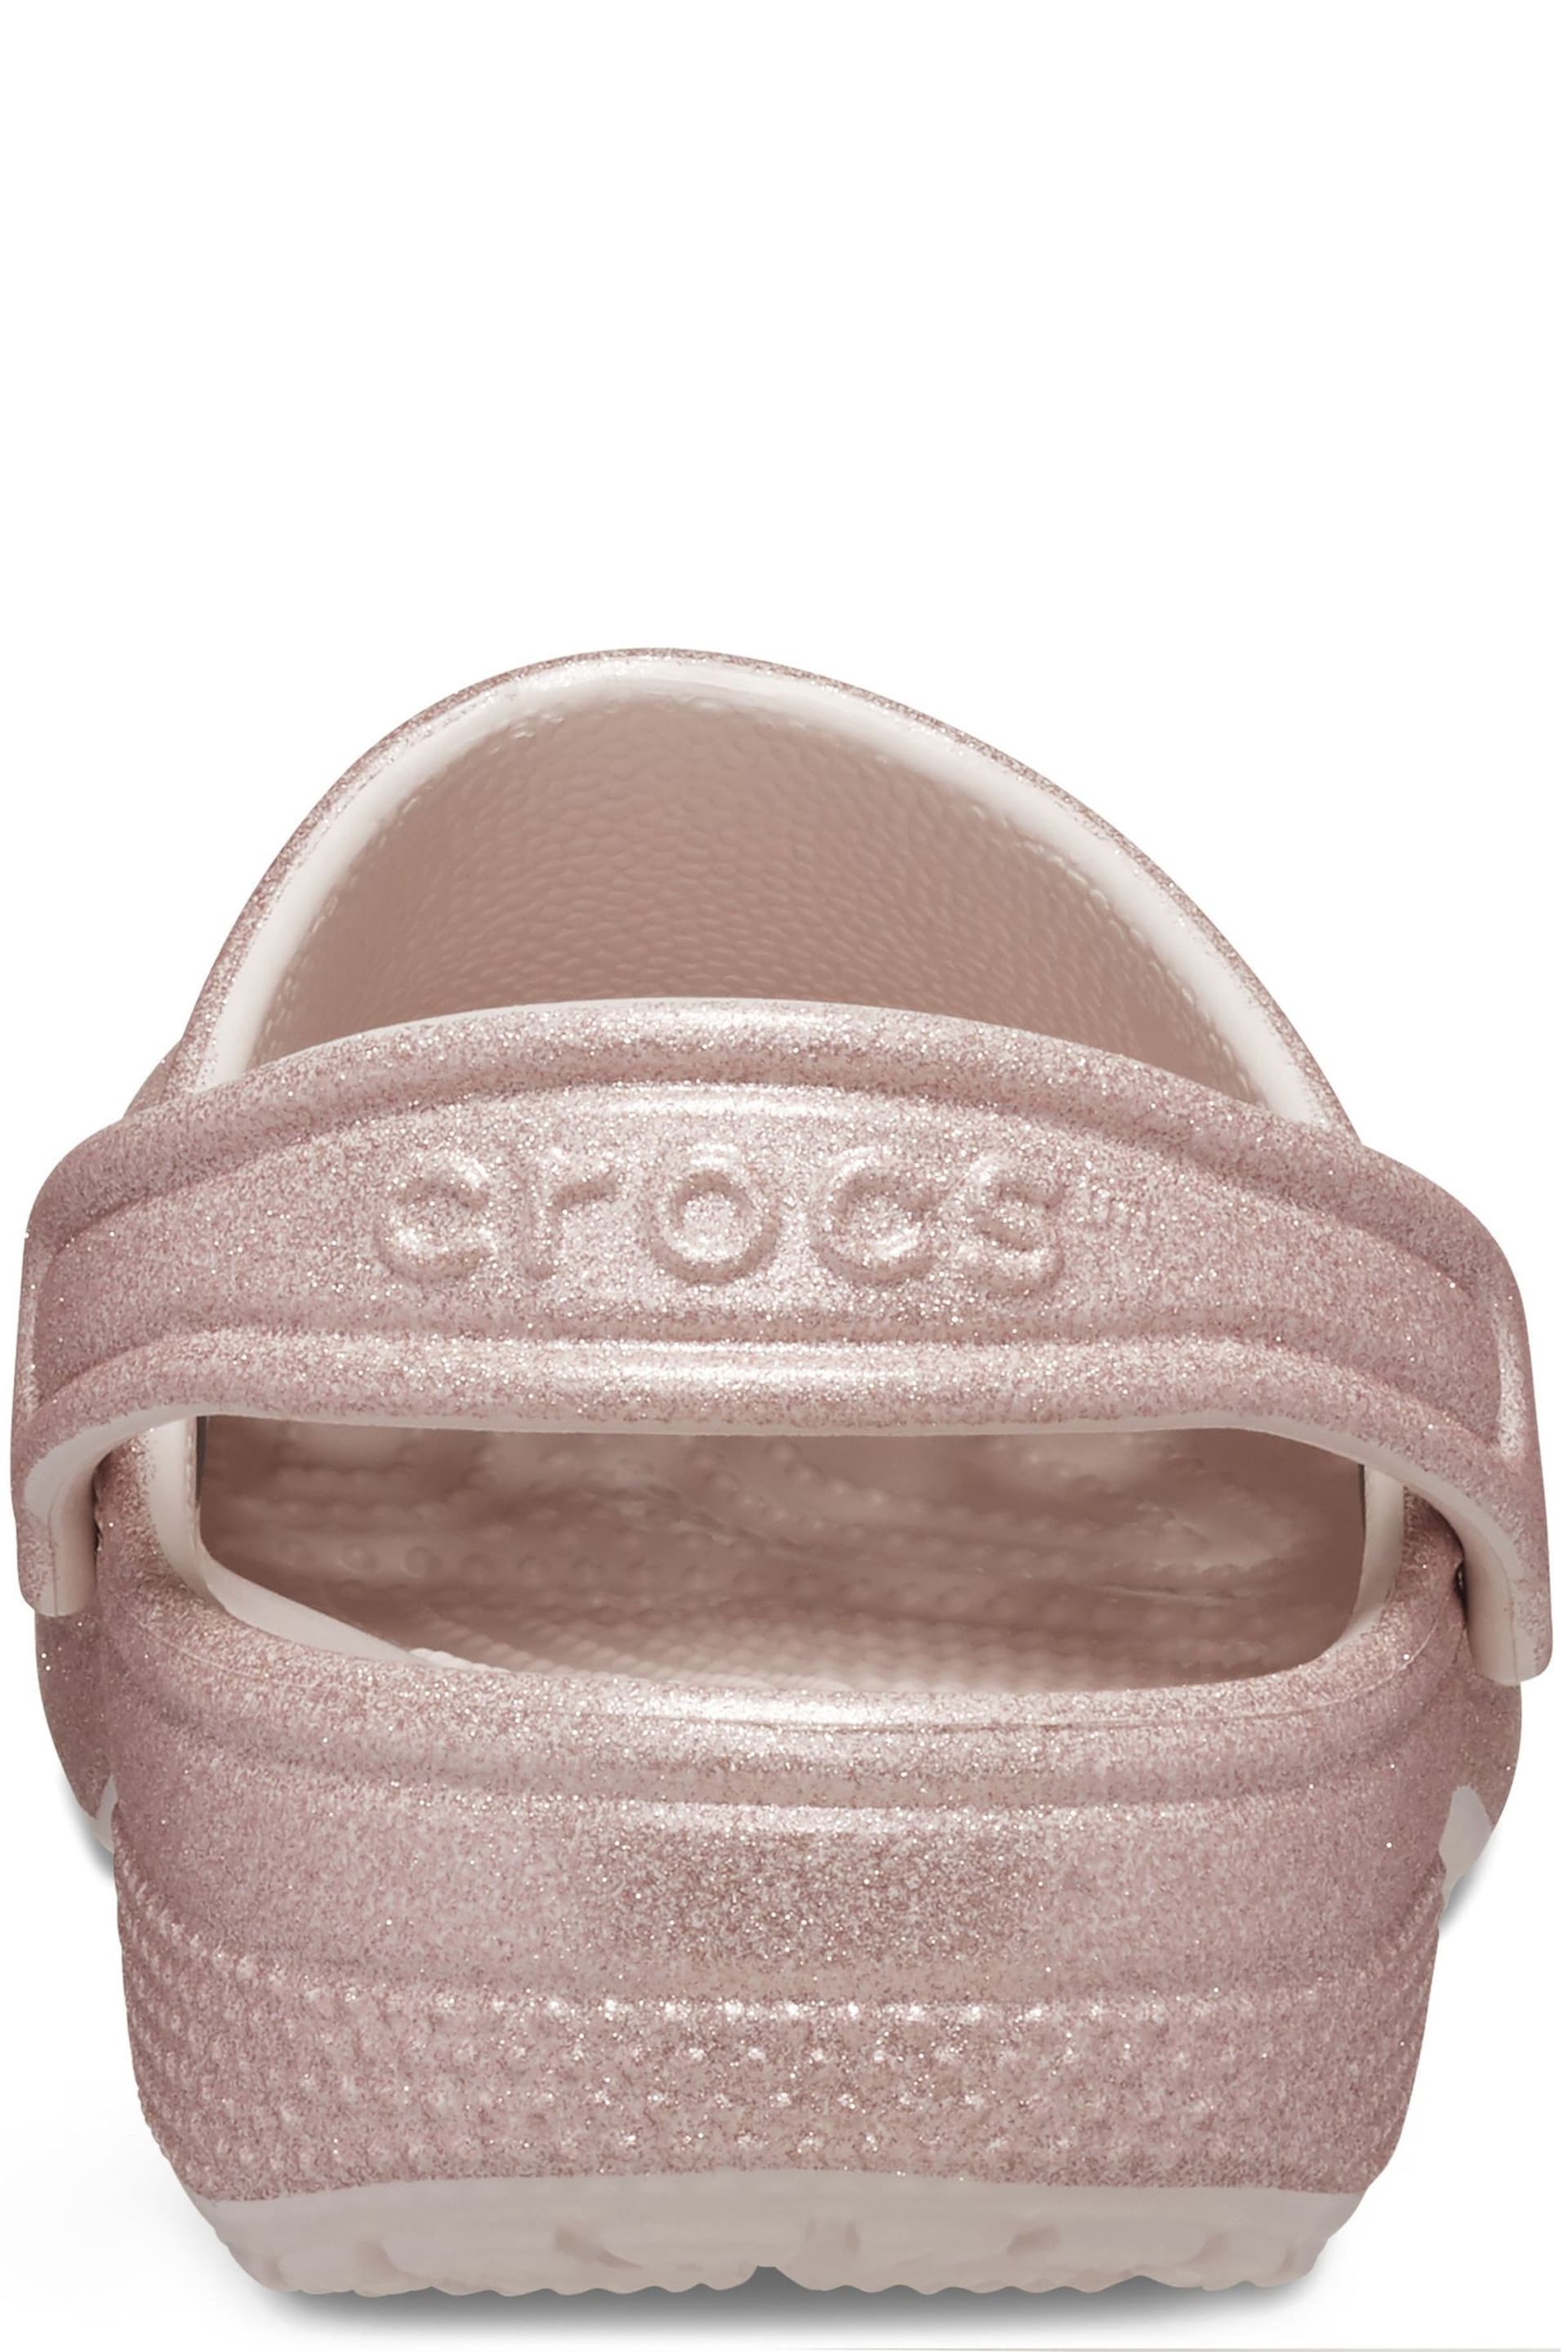 Crocs Classic Toddler Glitter Clogs - Image 3 of 8